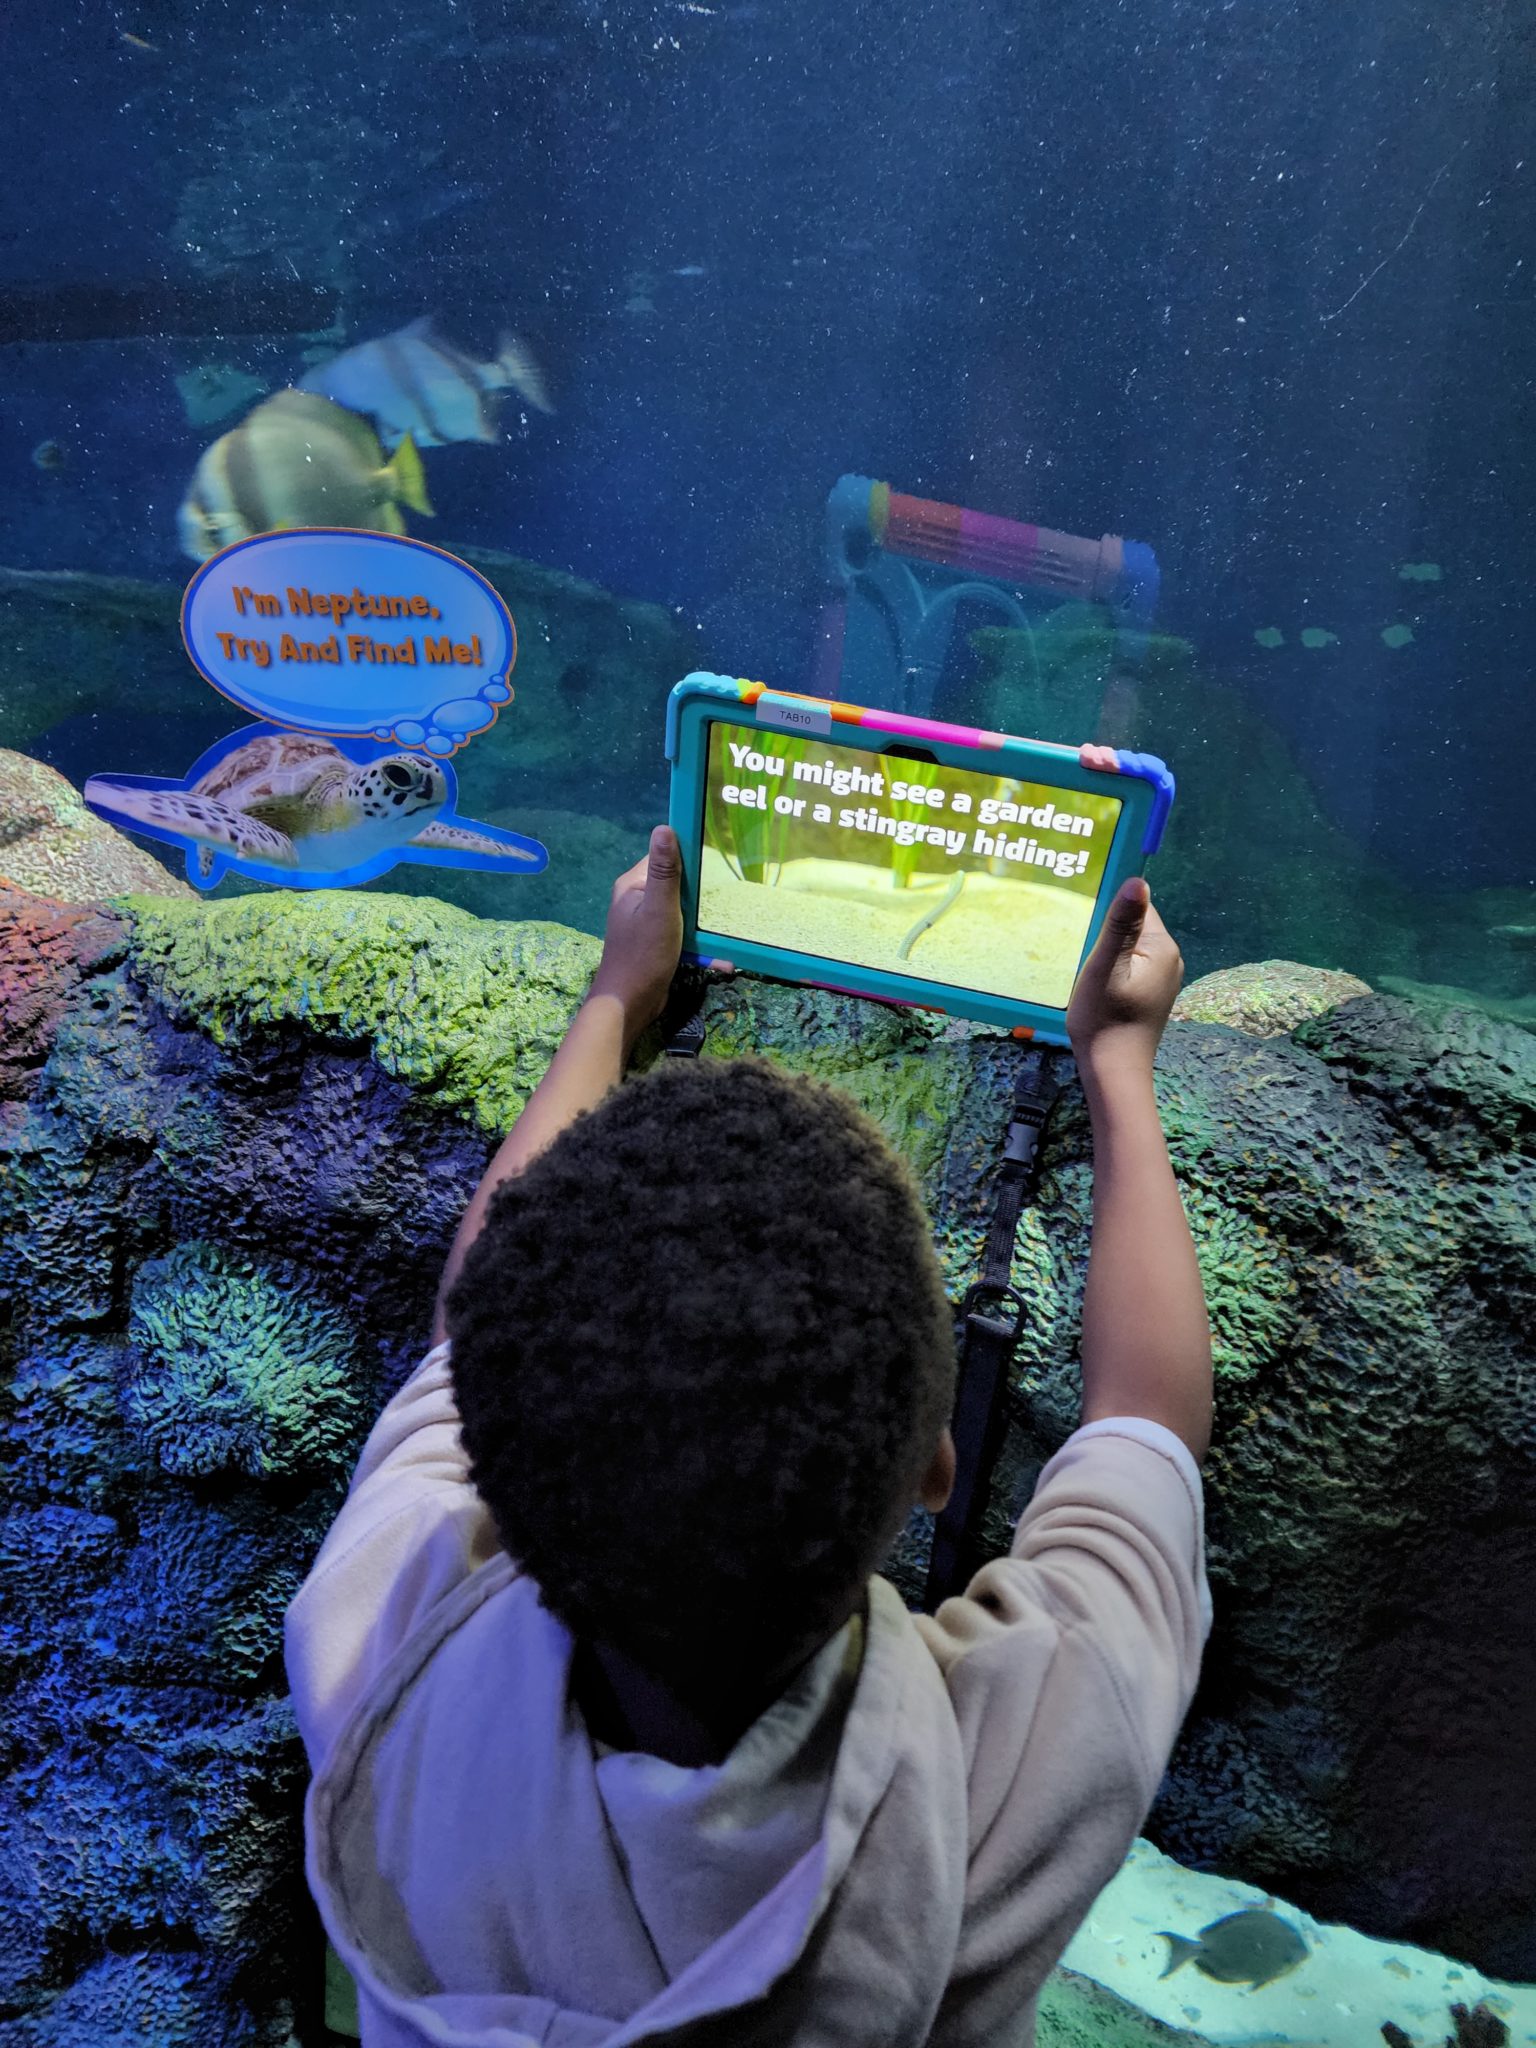 SEA LIFE Charlotte-Concord Partners with ARtGlass to Offer World’s First Aquarium Tour in Wearable Augmented Reality